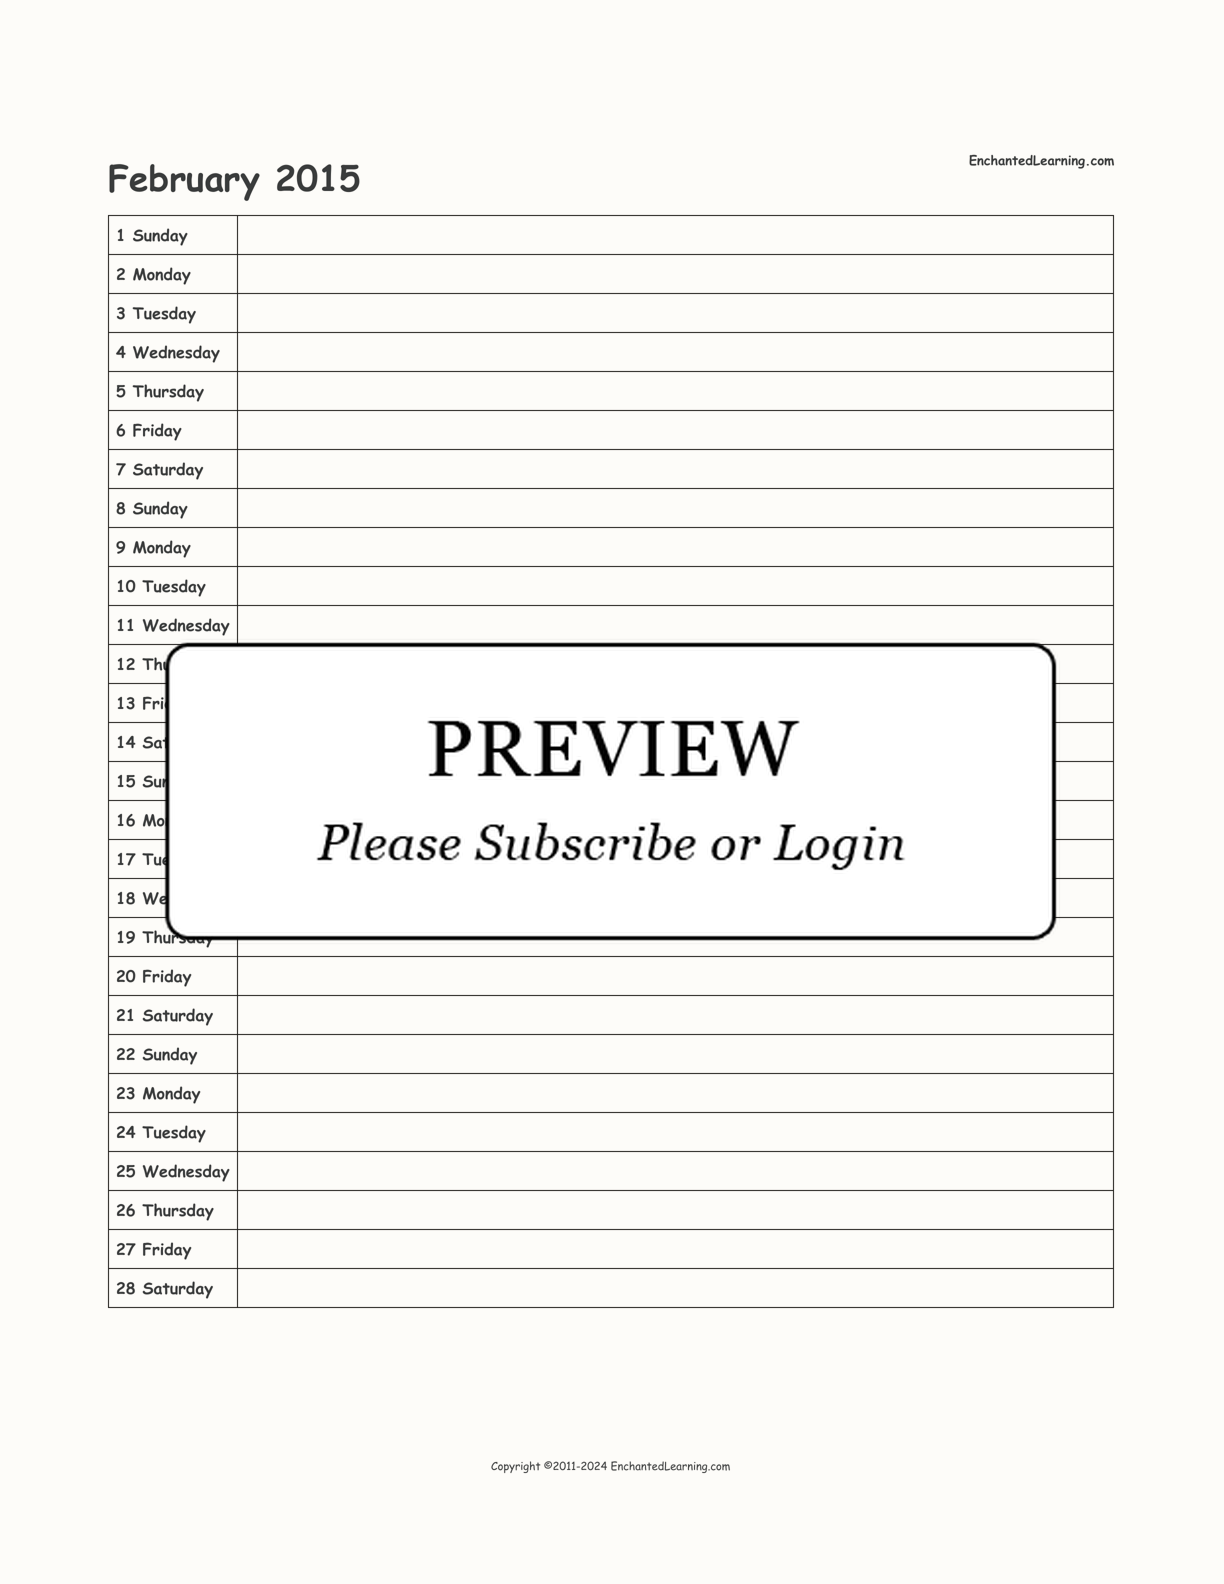 2015 Scheduling Calendar interactive printout page 2